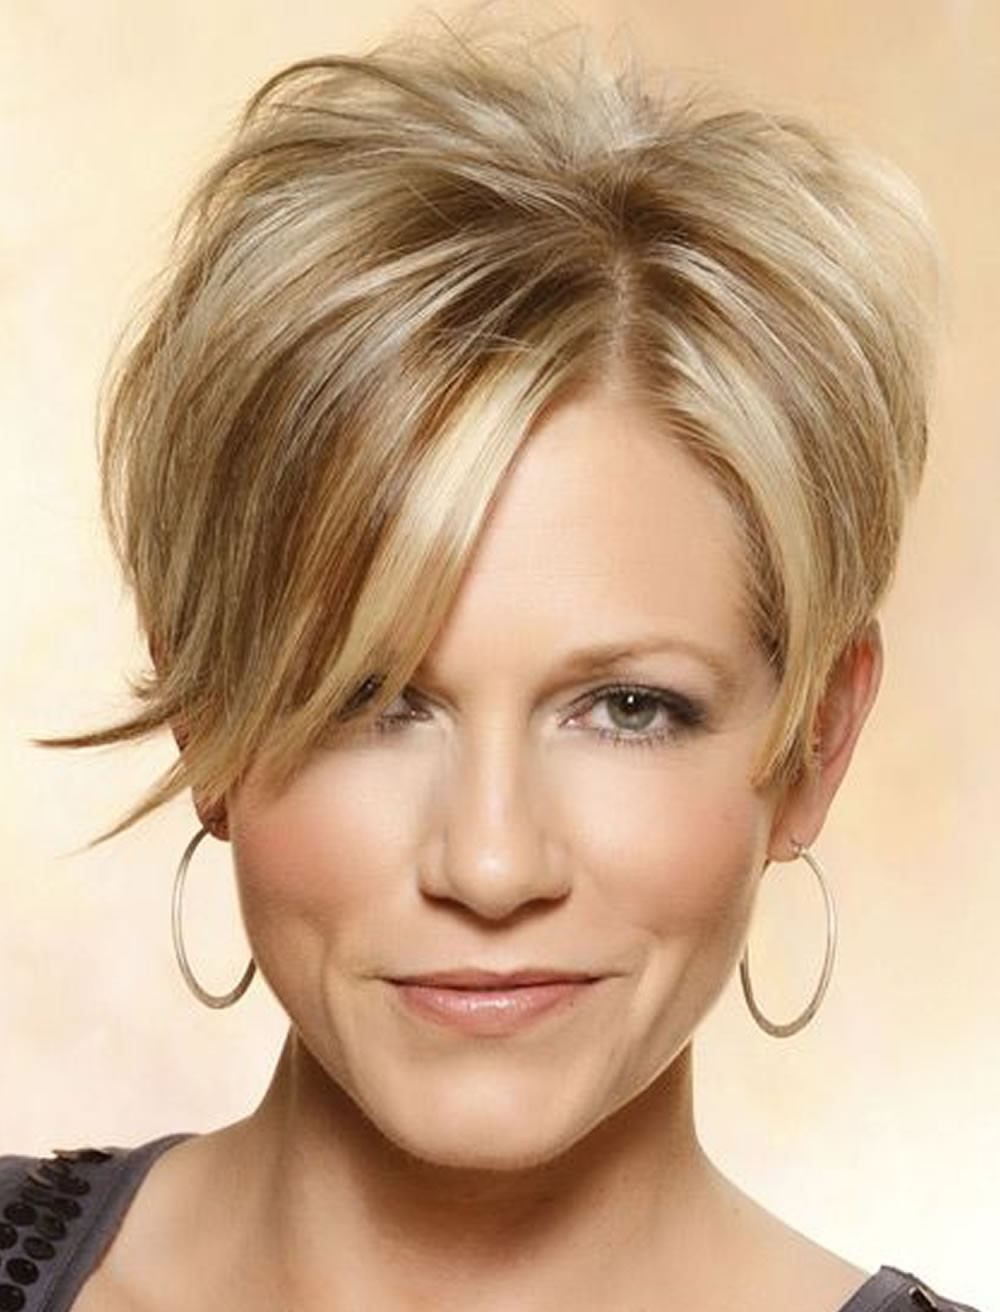 Womens Short Hair Cut
 The Best Short Haircuts that are the most trendy for women